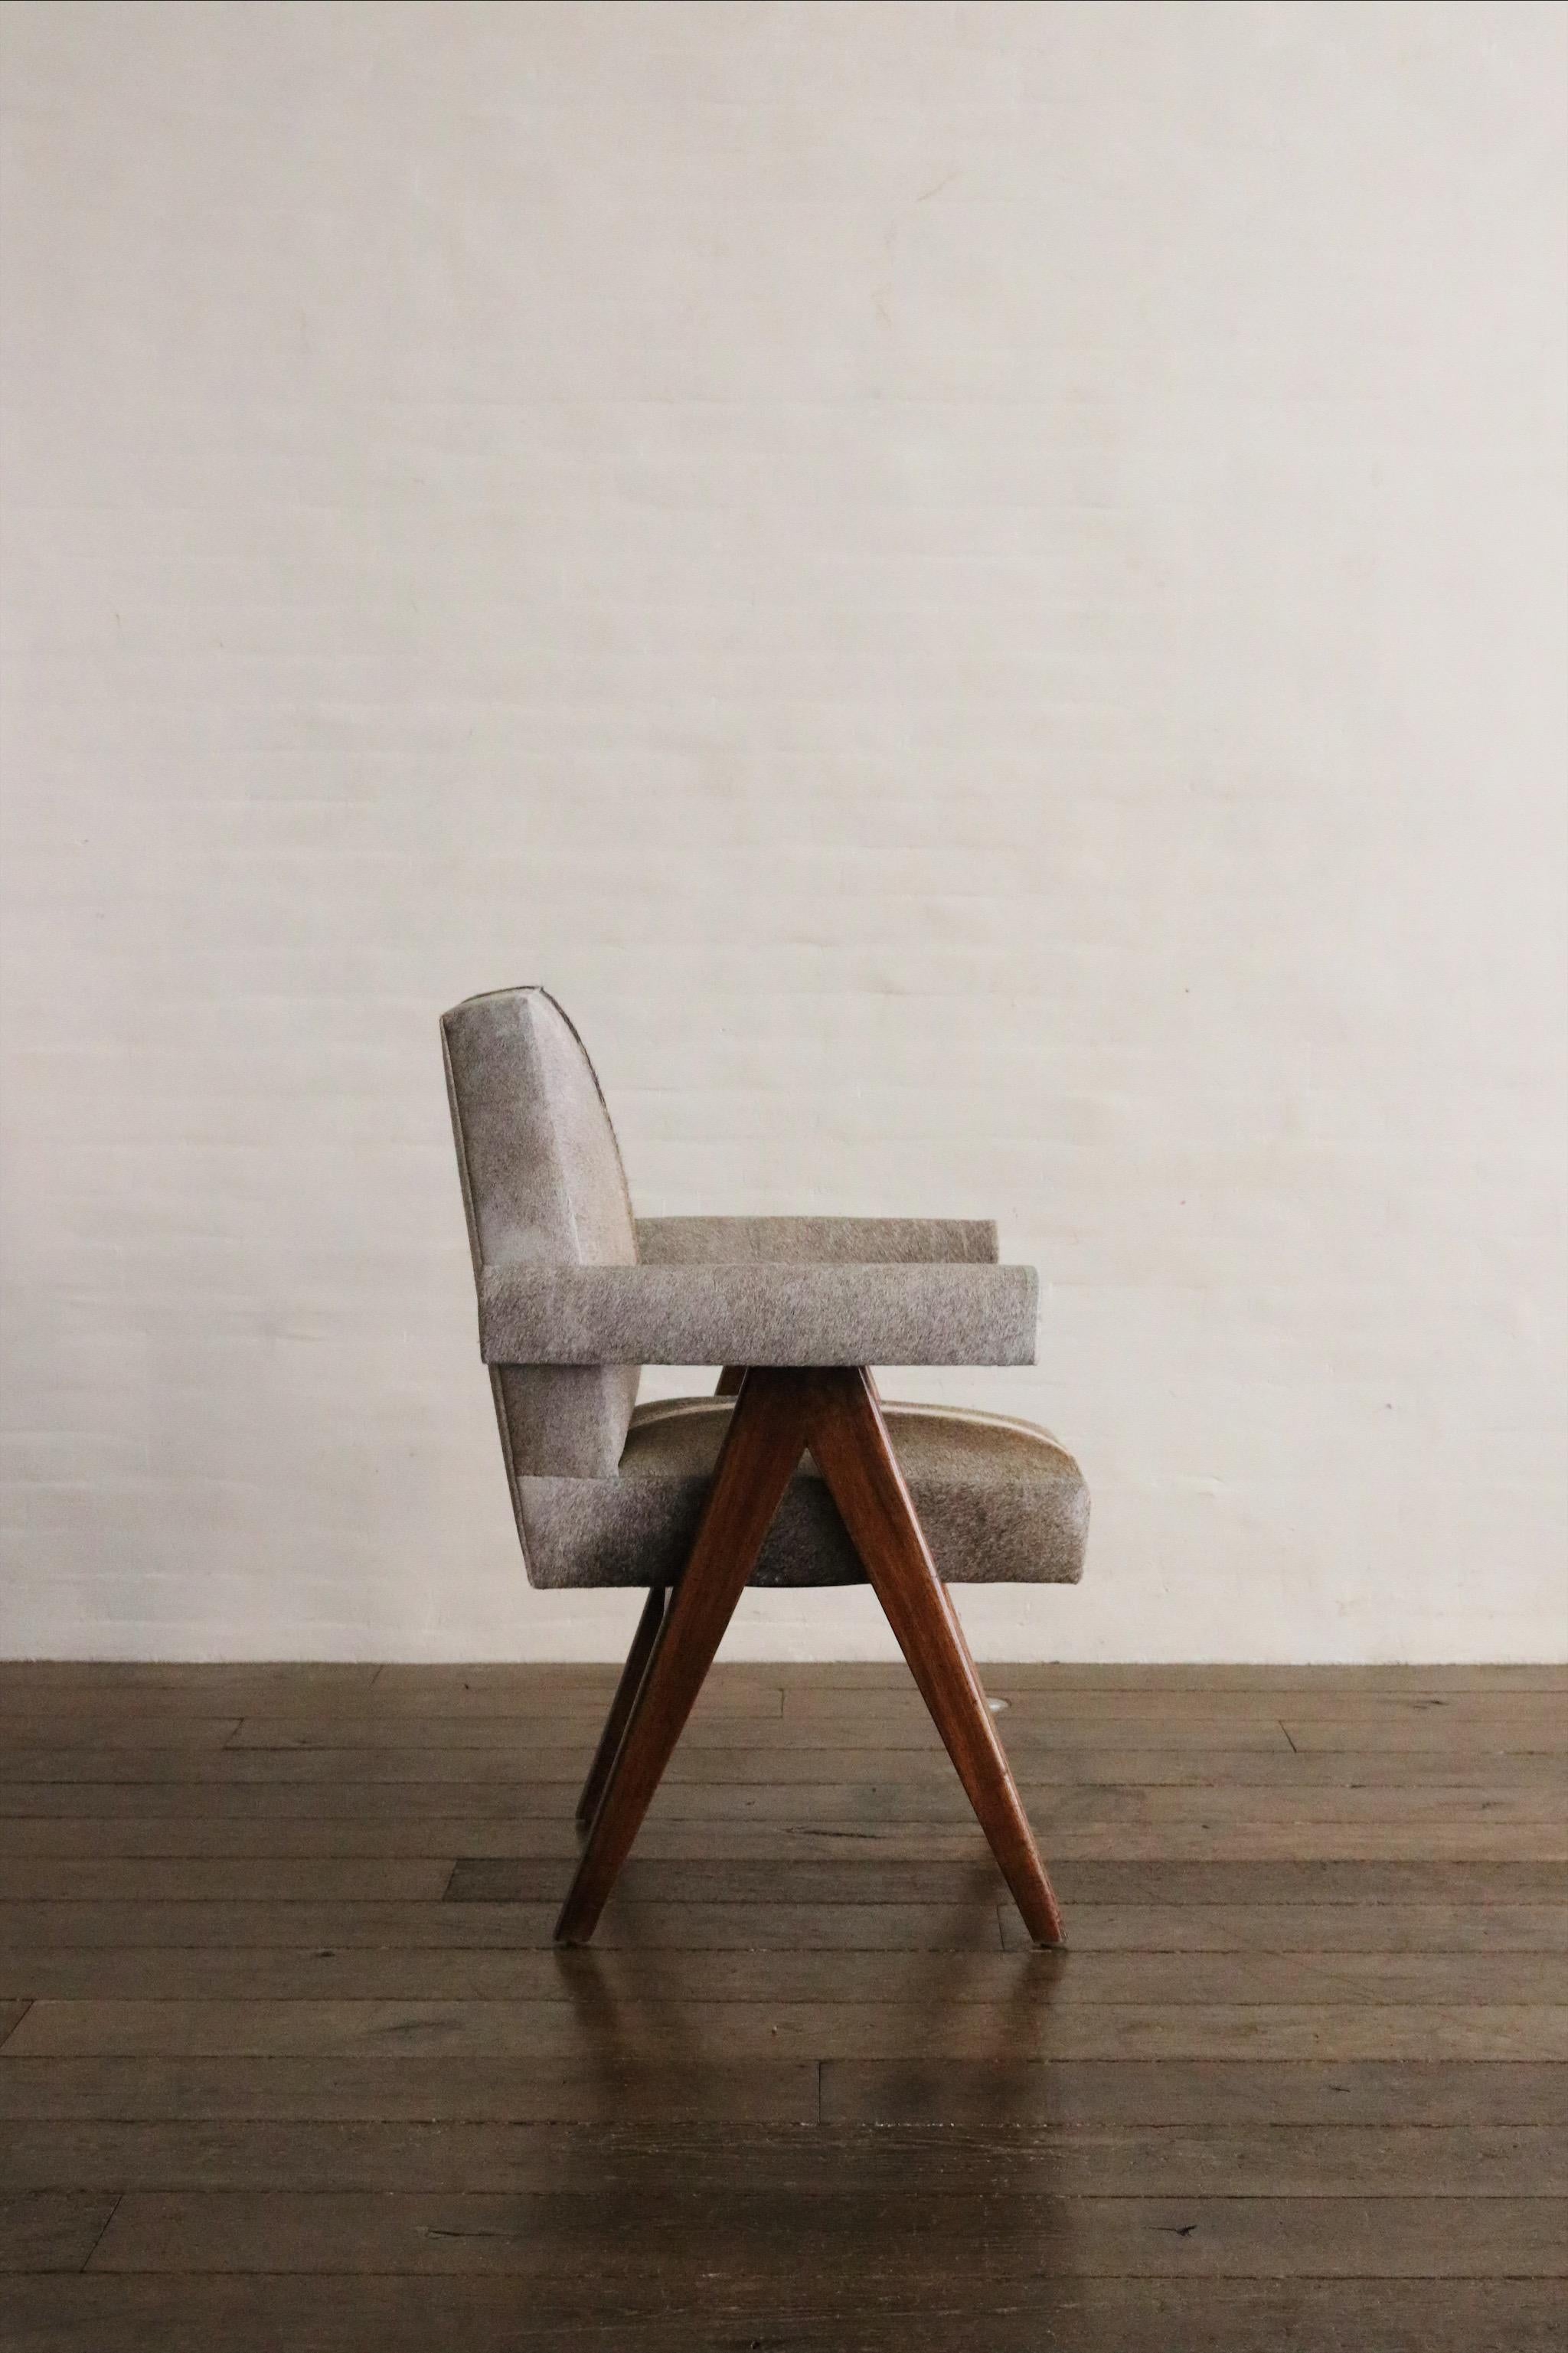 Then PJ-SI-30-C - Pierre Jeanneret Senate - Committee Arm Chair beautifully re-upholstered in natural hair on hide. This chair is renown for its stunning silhouette and form, the stunning profile and beautiful leg details make this an iconic piece